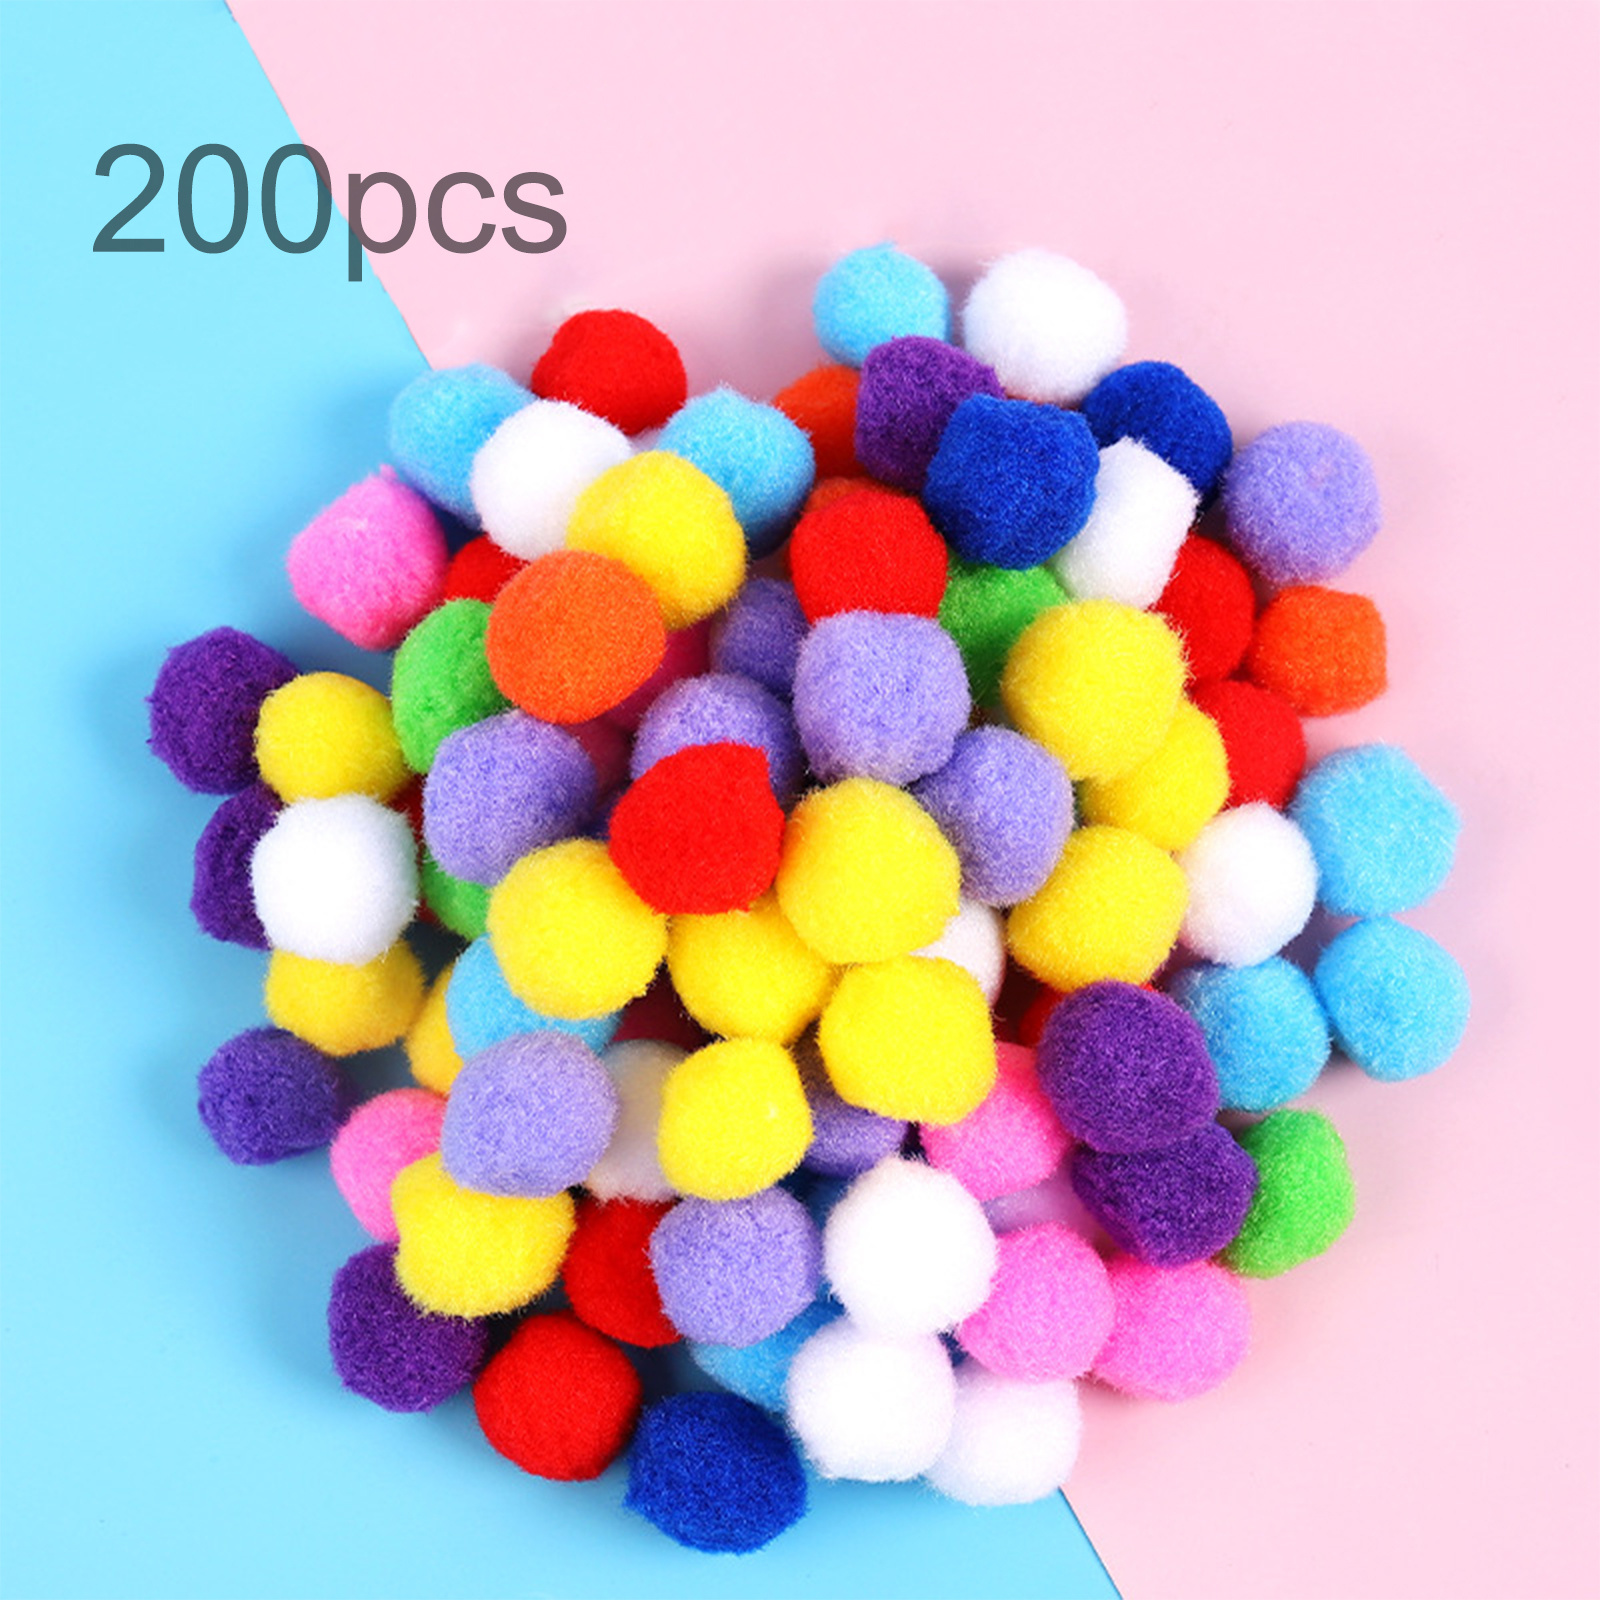 100pcs Mixed Color Pom Poms, Craft Pom Pom Balls, Colorful Pompoms, For Art  And Crafts Making Decoration, Halloween, Christmas, Thanksgiving, New  Year'S